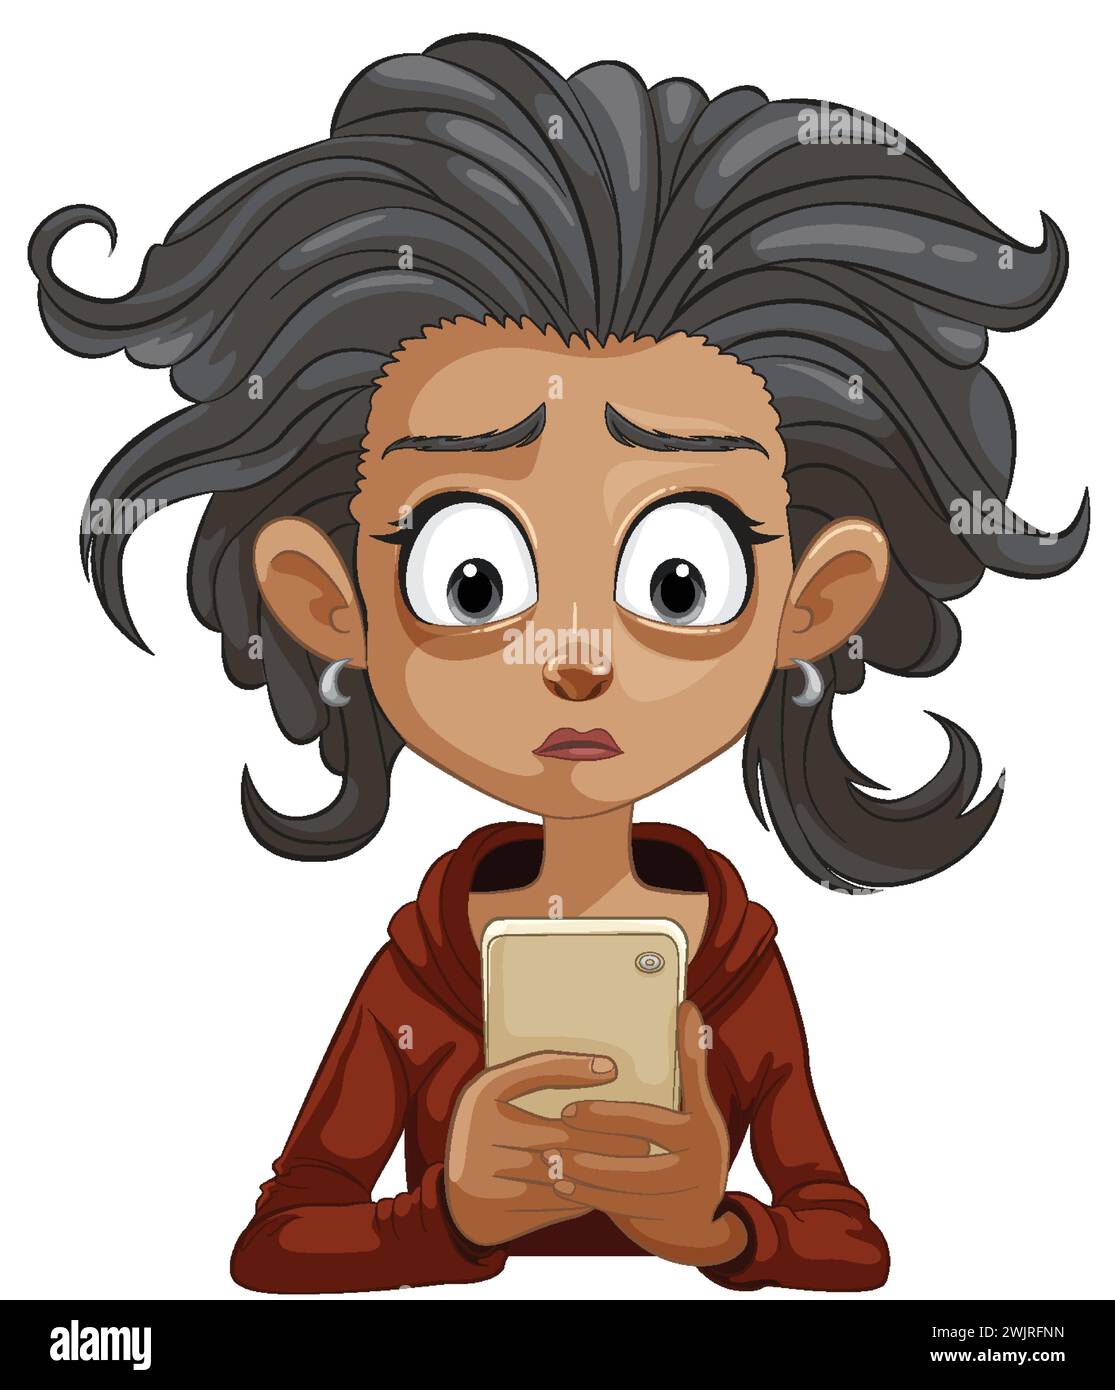 Cartoon of a woman shocked by her phone Stock Vector